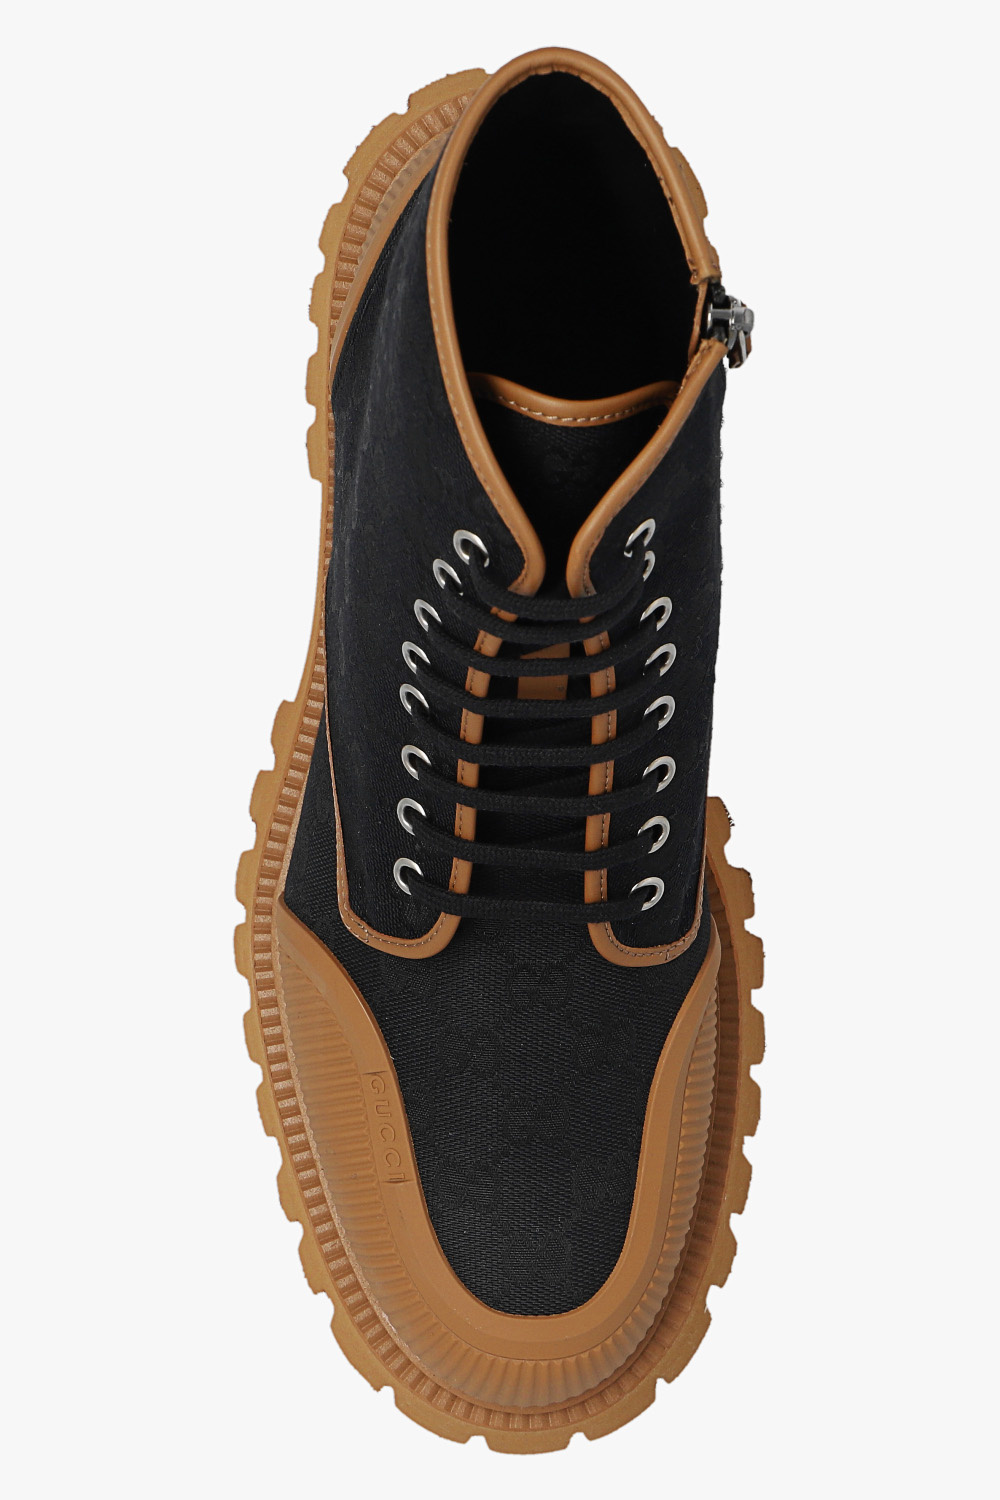 Gucci Lace-up boots